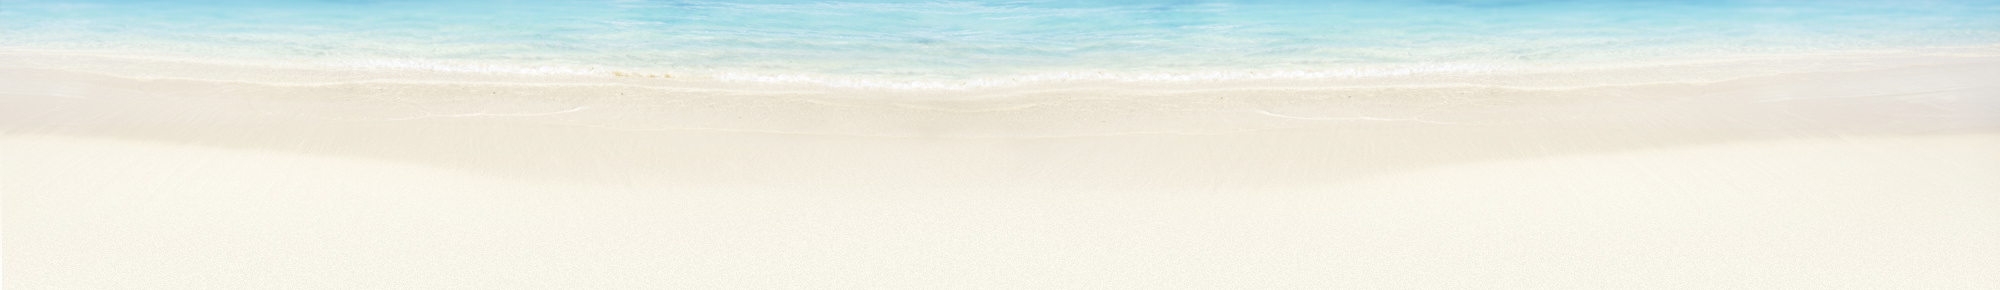 Waves on beach page header background